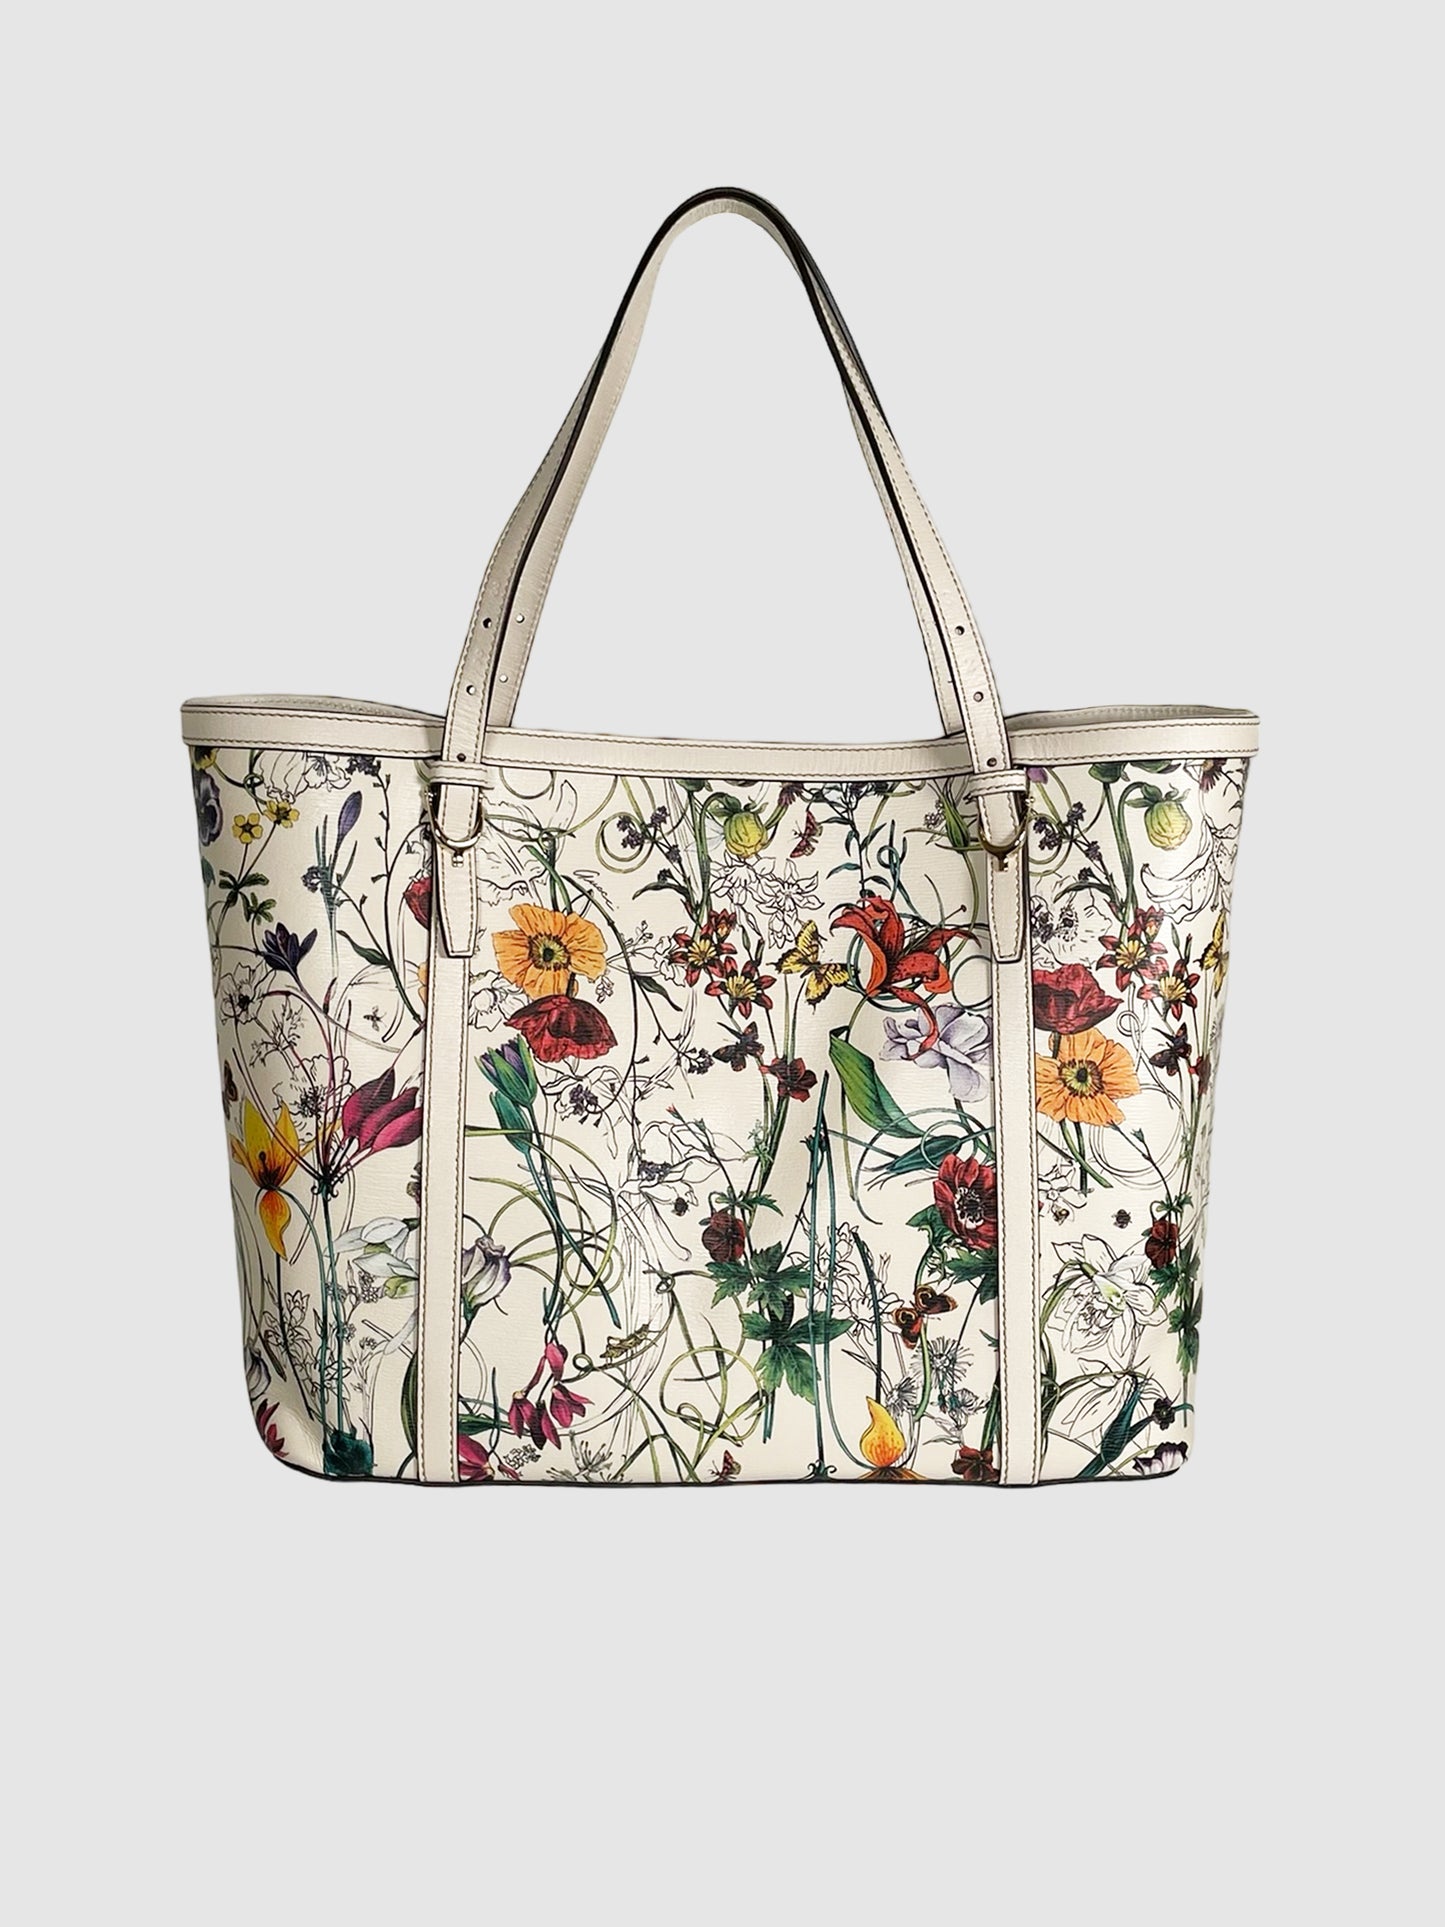 Gucci White with Multi Coloured Floral Printed Canvas Tote Bag